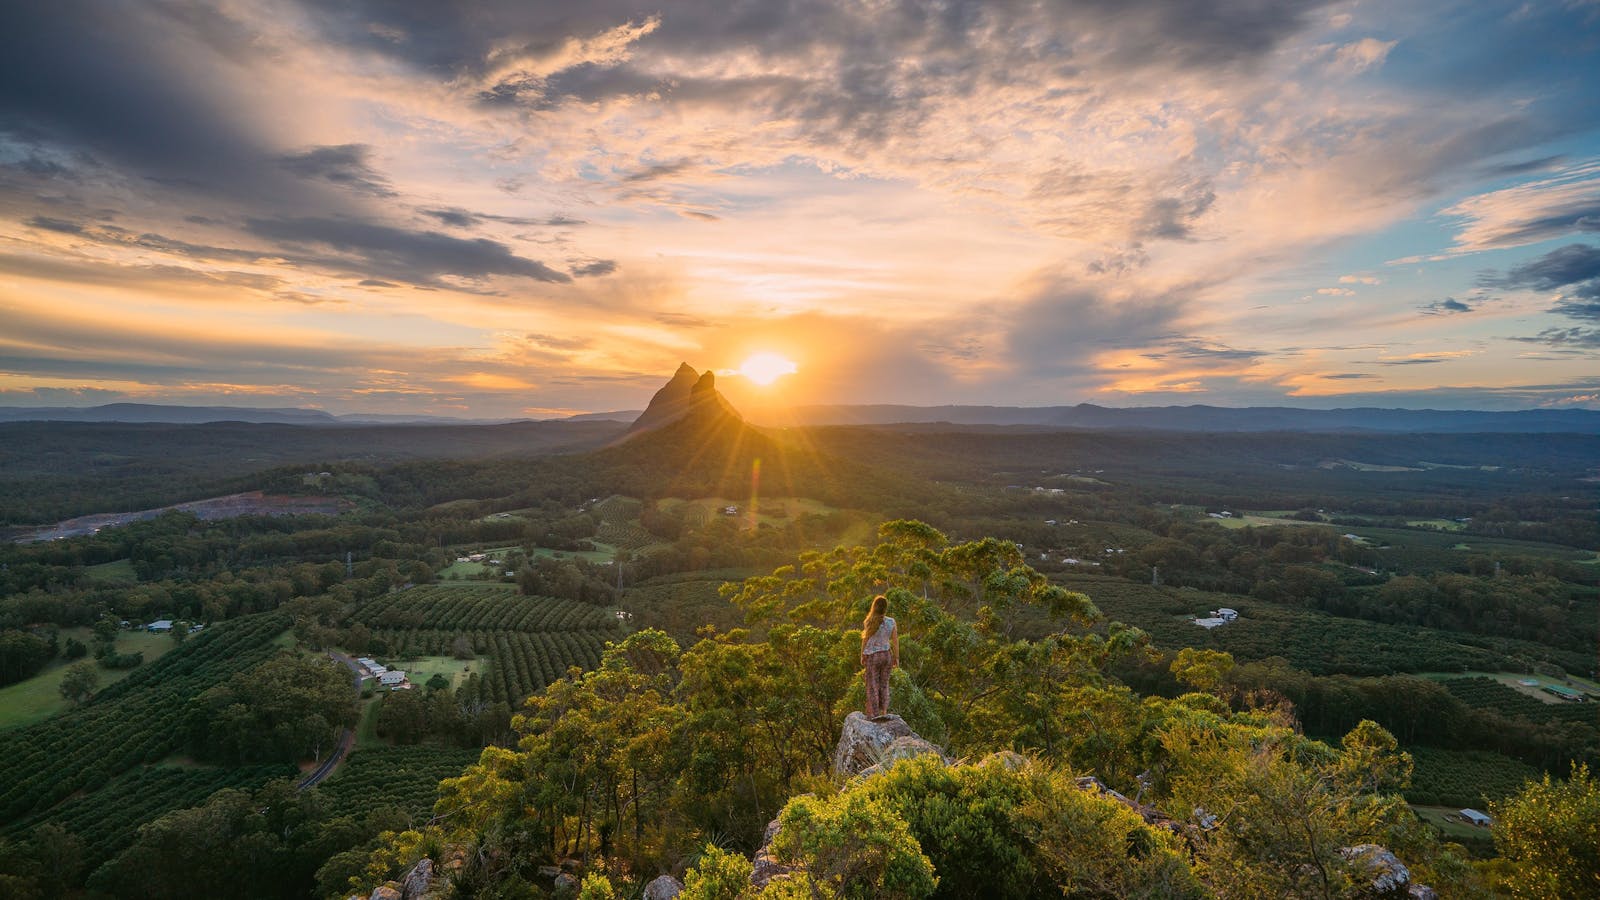 View of Glass House Mountains